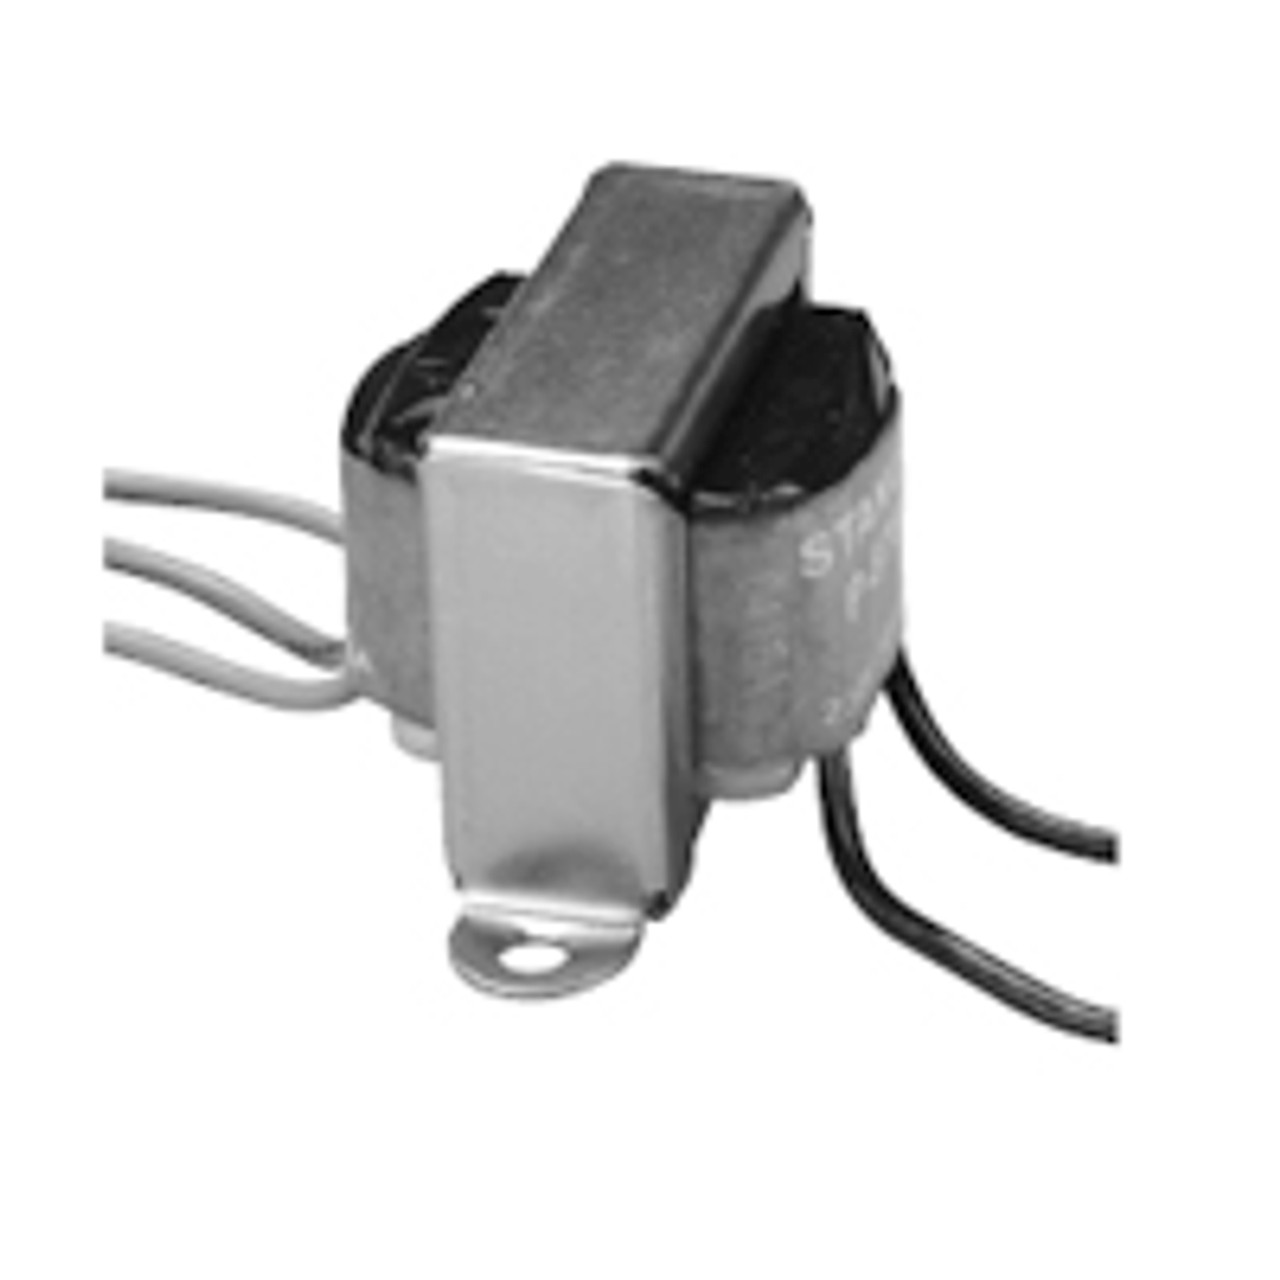 Stancor / White Rodgers P-8390 Power Transformers